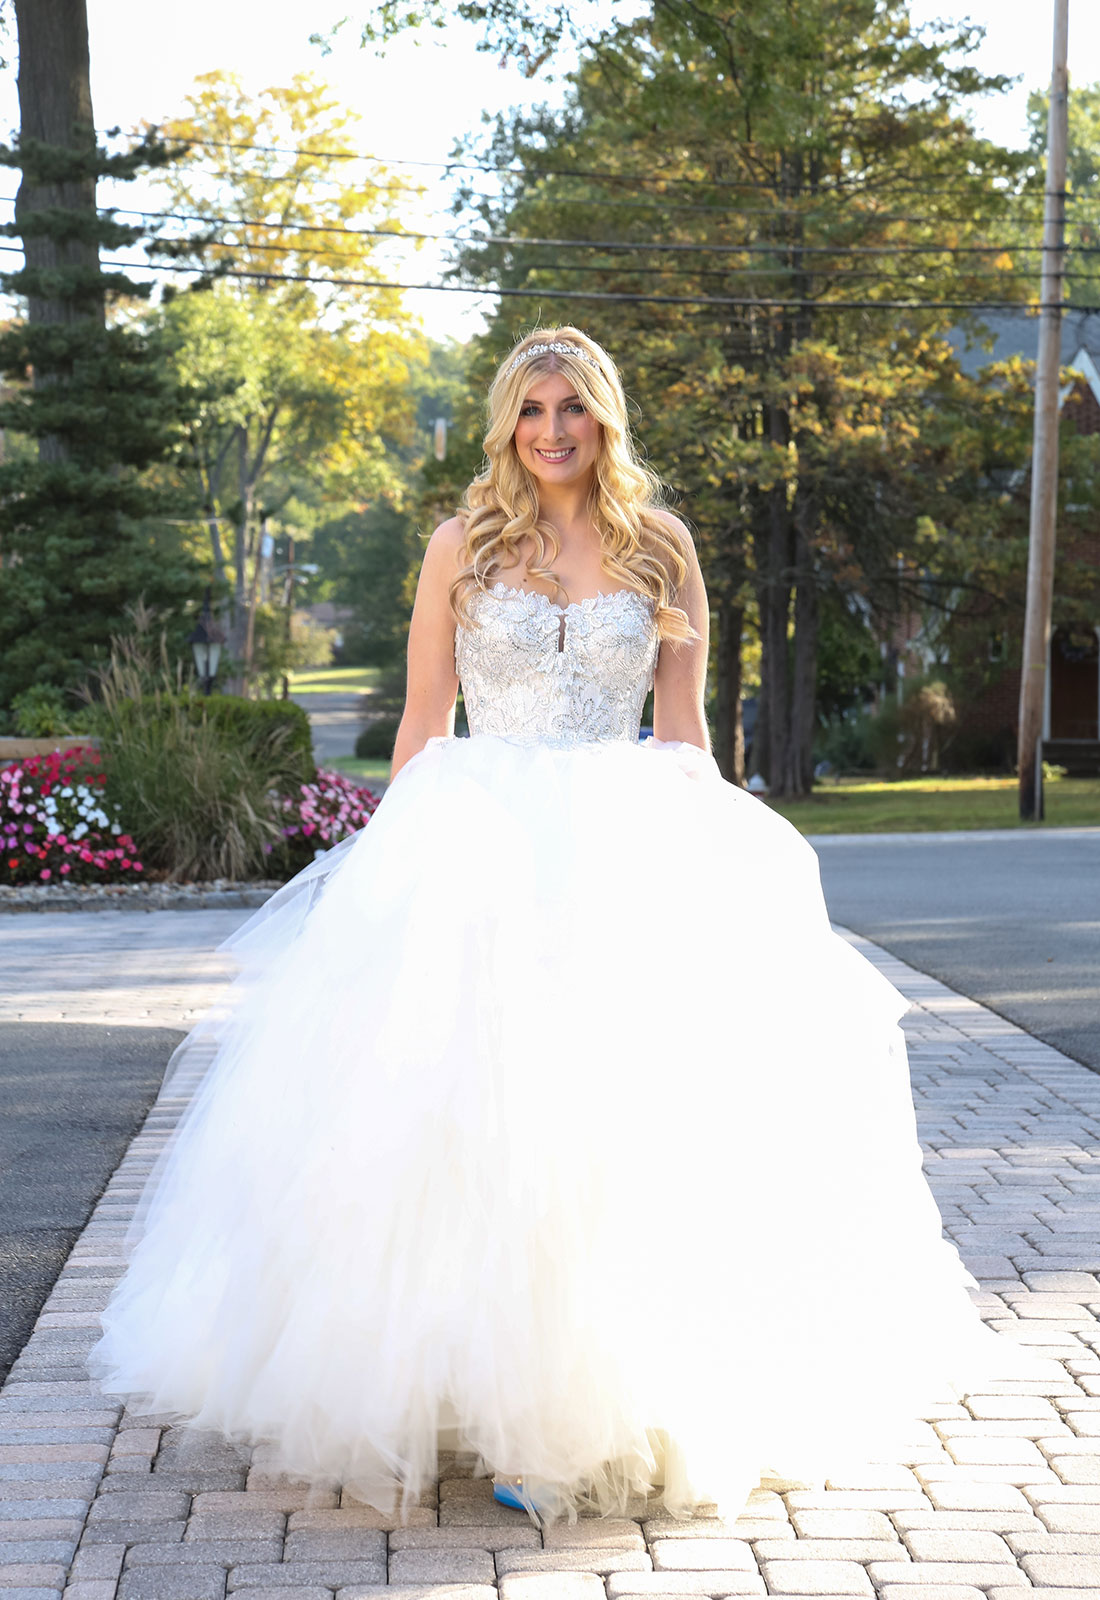 pnina tornai ball gown with crystals